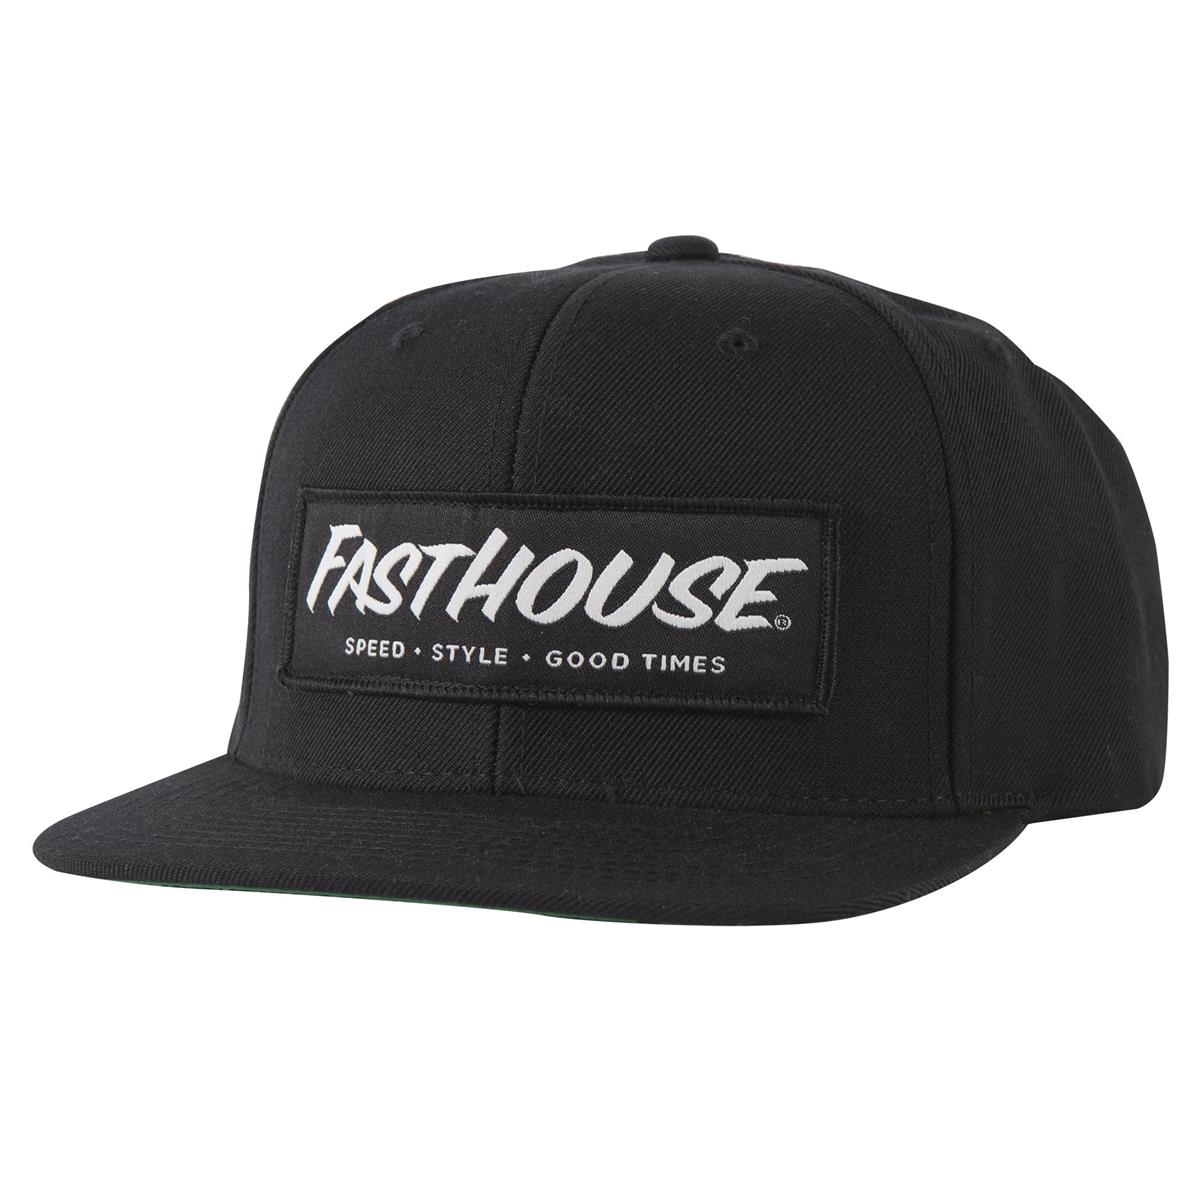 Fasthouse Cappellino Snap Back Speedstyle Black